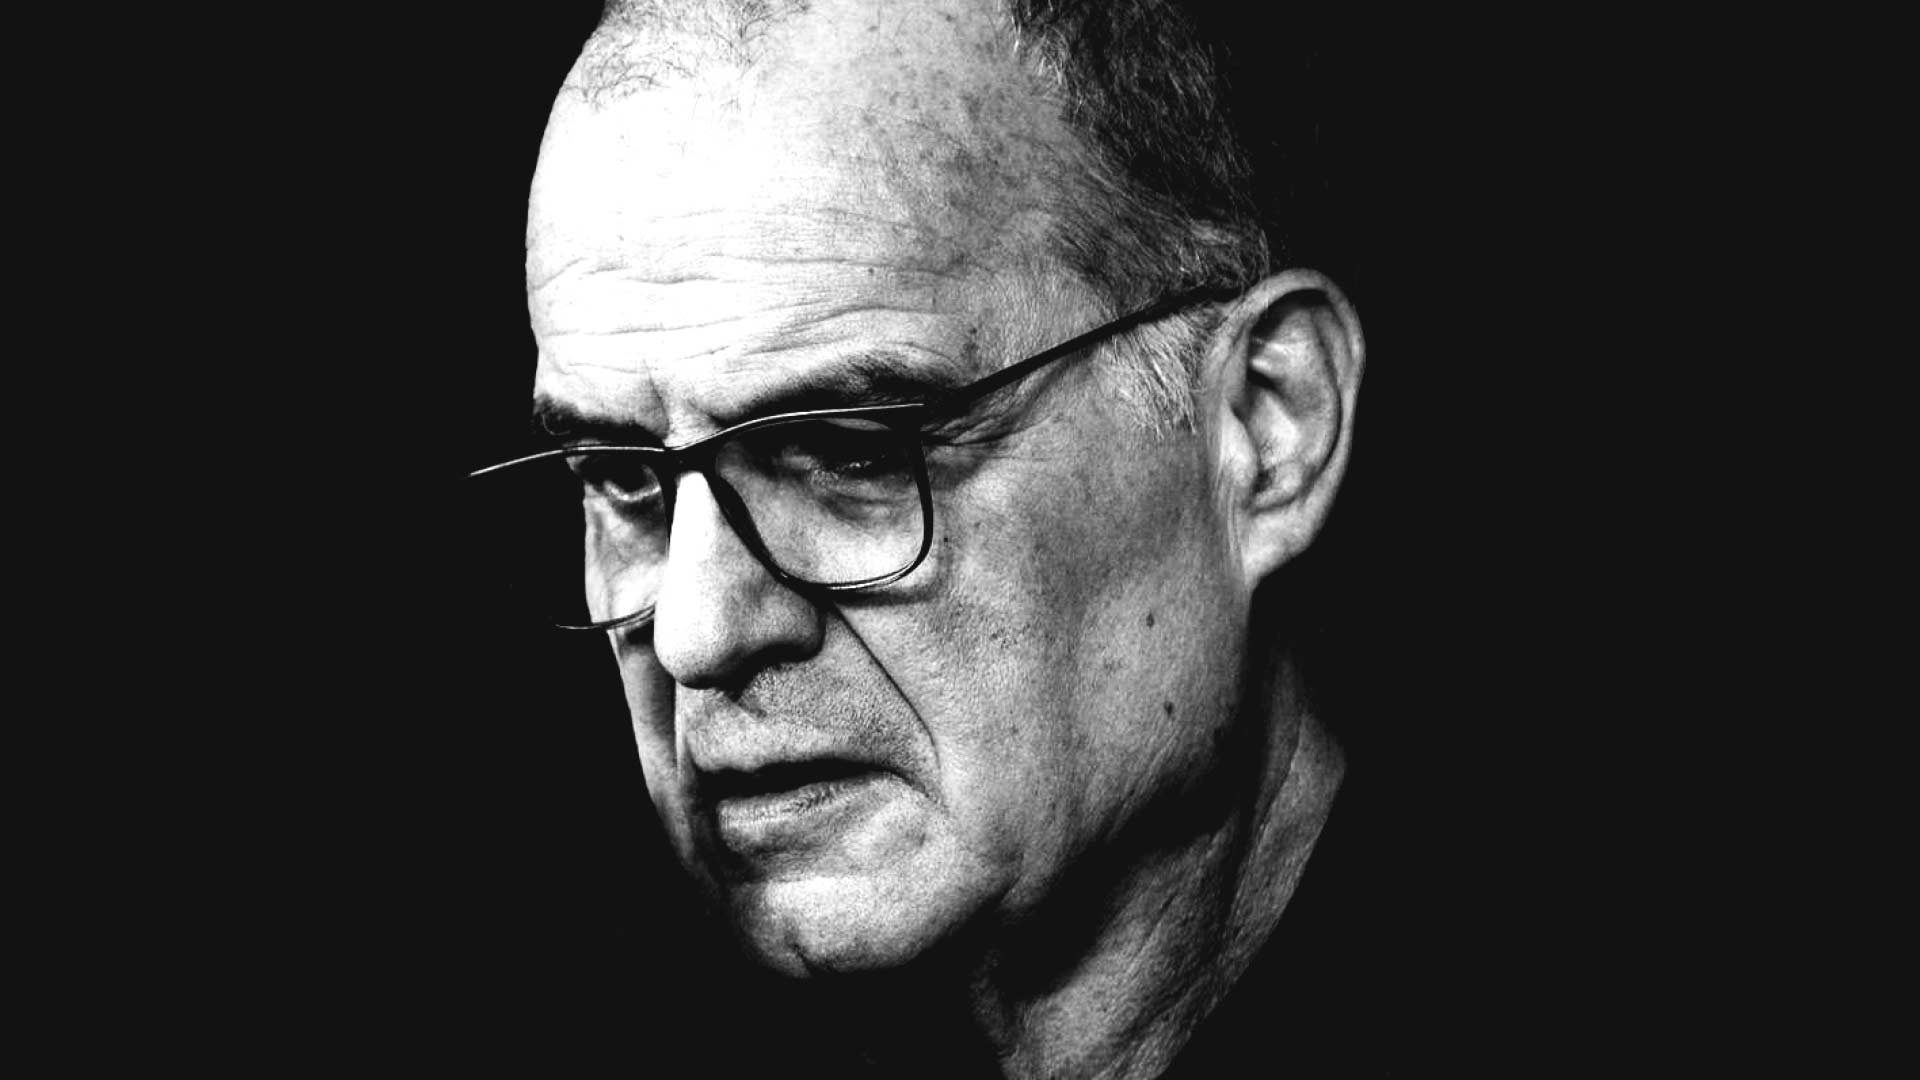 A black and white image of Marcelo Bielsa against a moody black backdrop